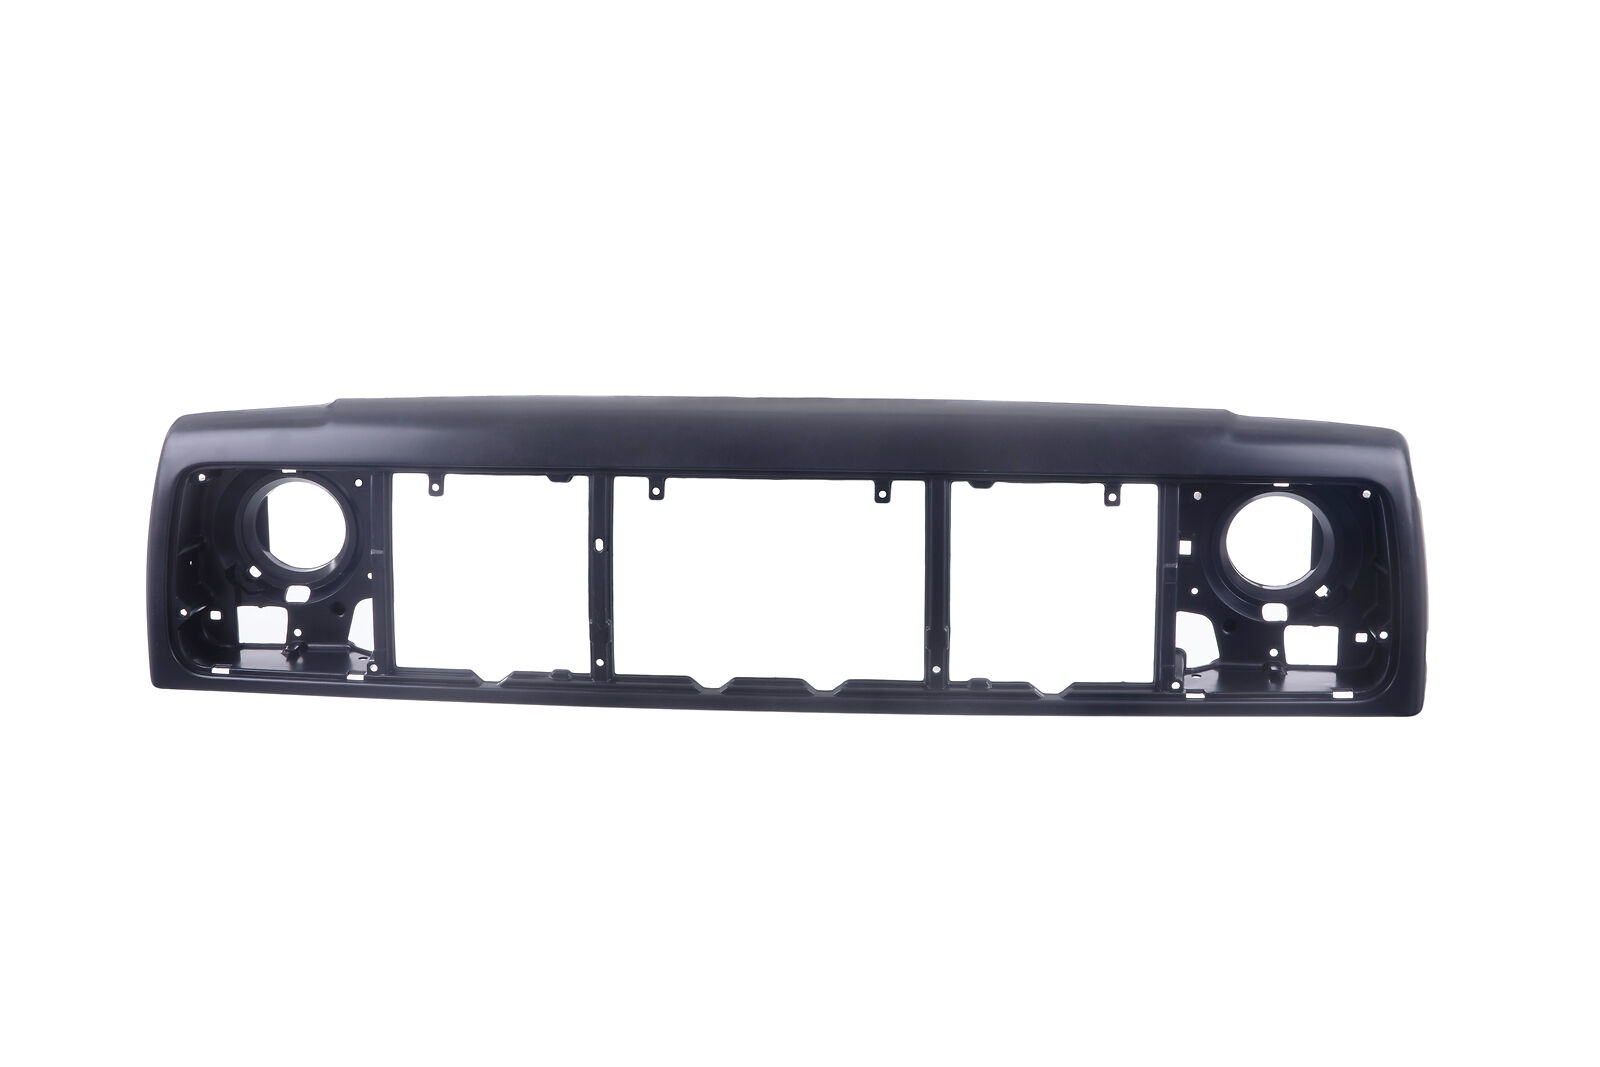 San Diego Mall AM New Front Nose Panel For 97-01 Superlatite 6Cyl Plastic Engine 4Cyl Cherokee Jeep